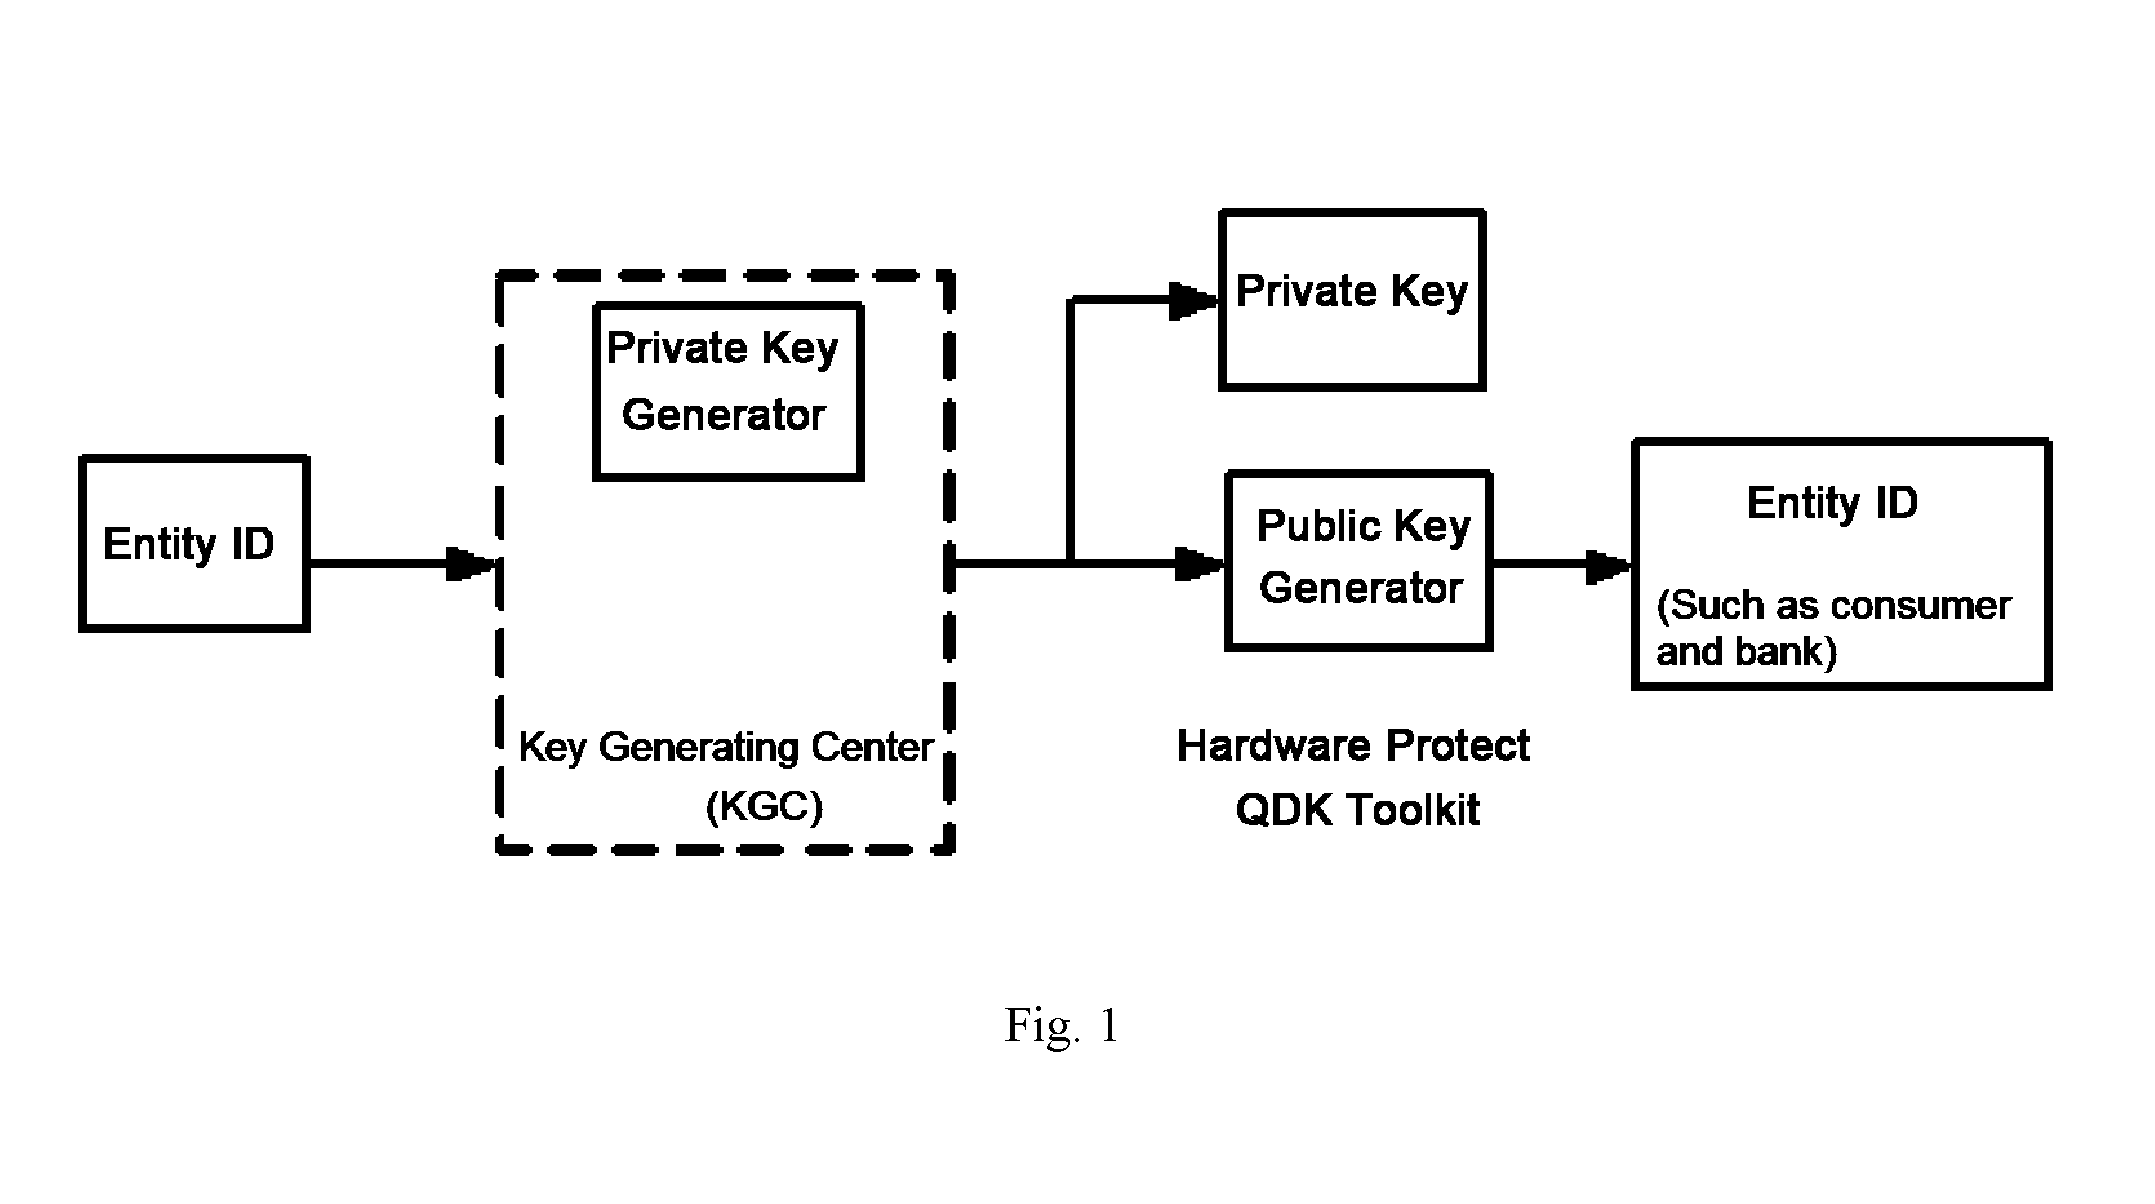 Self-authenticated method with timestamp